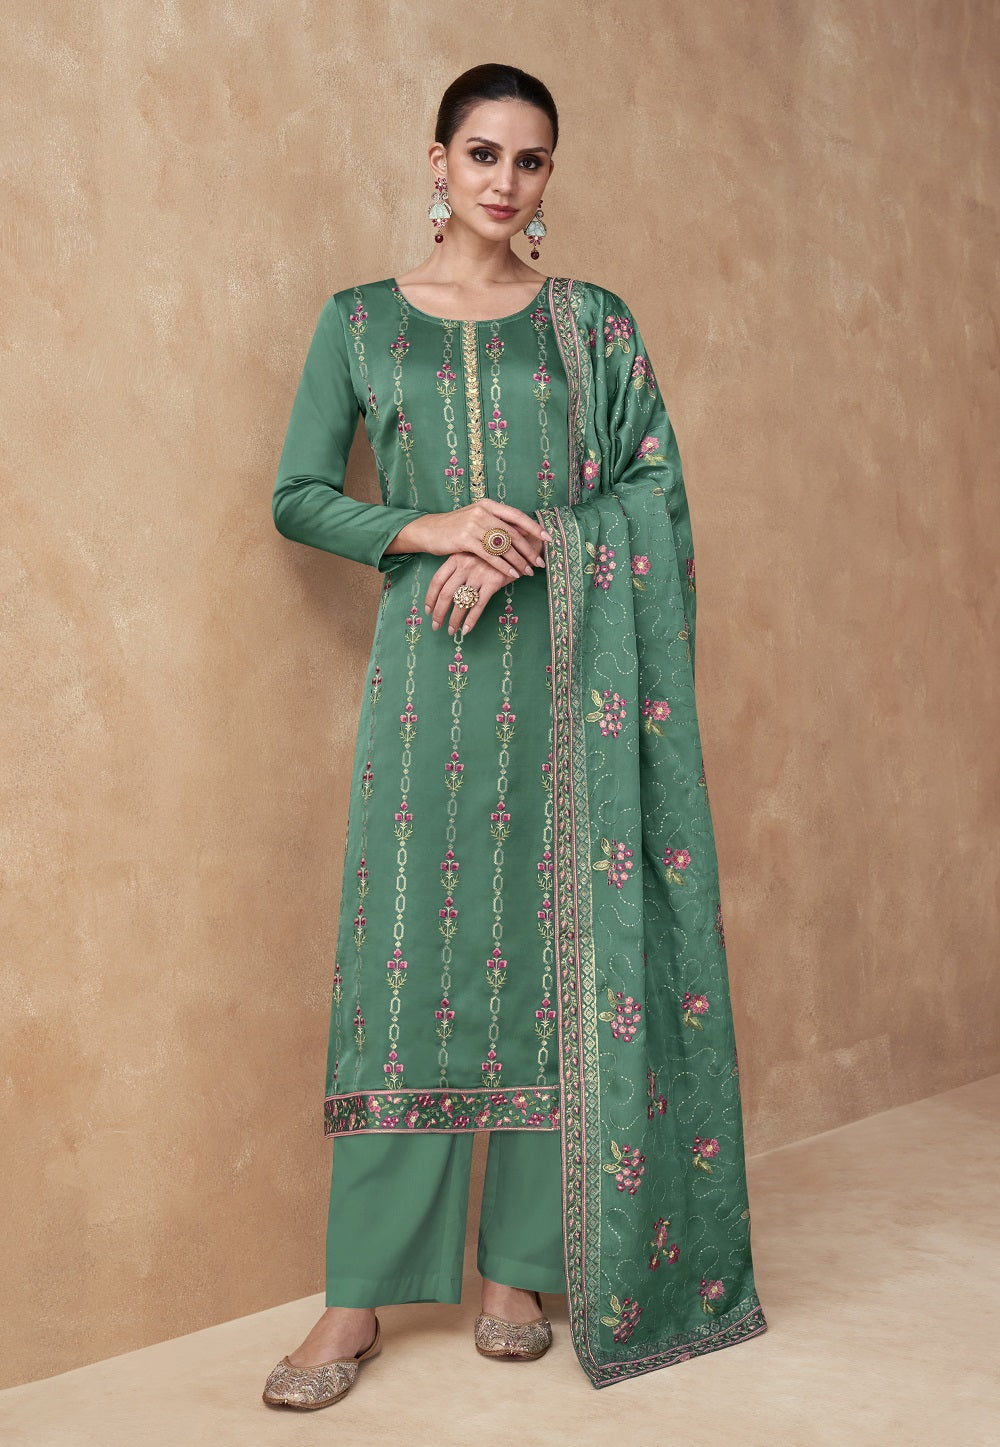 Satin Georgette Embroidered Pakistani Suit in Teal Green